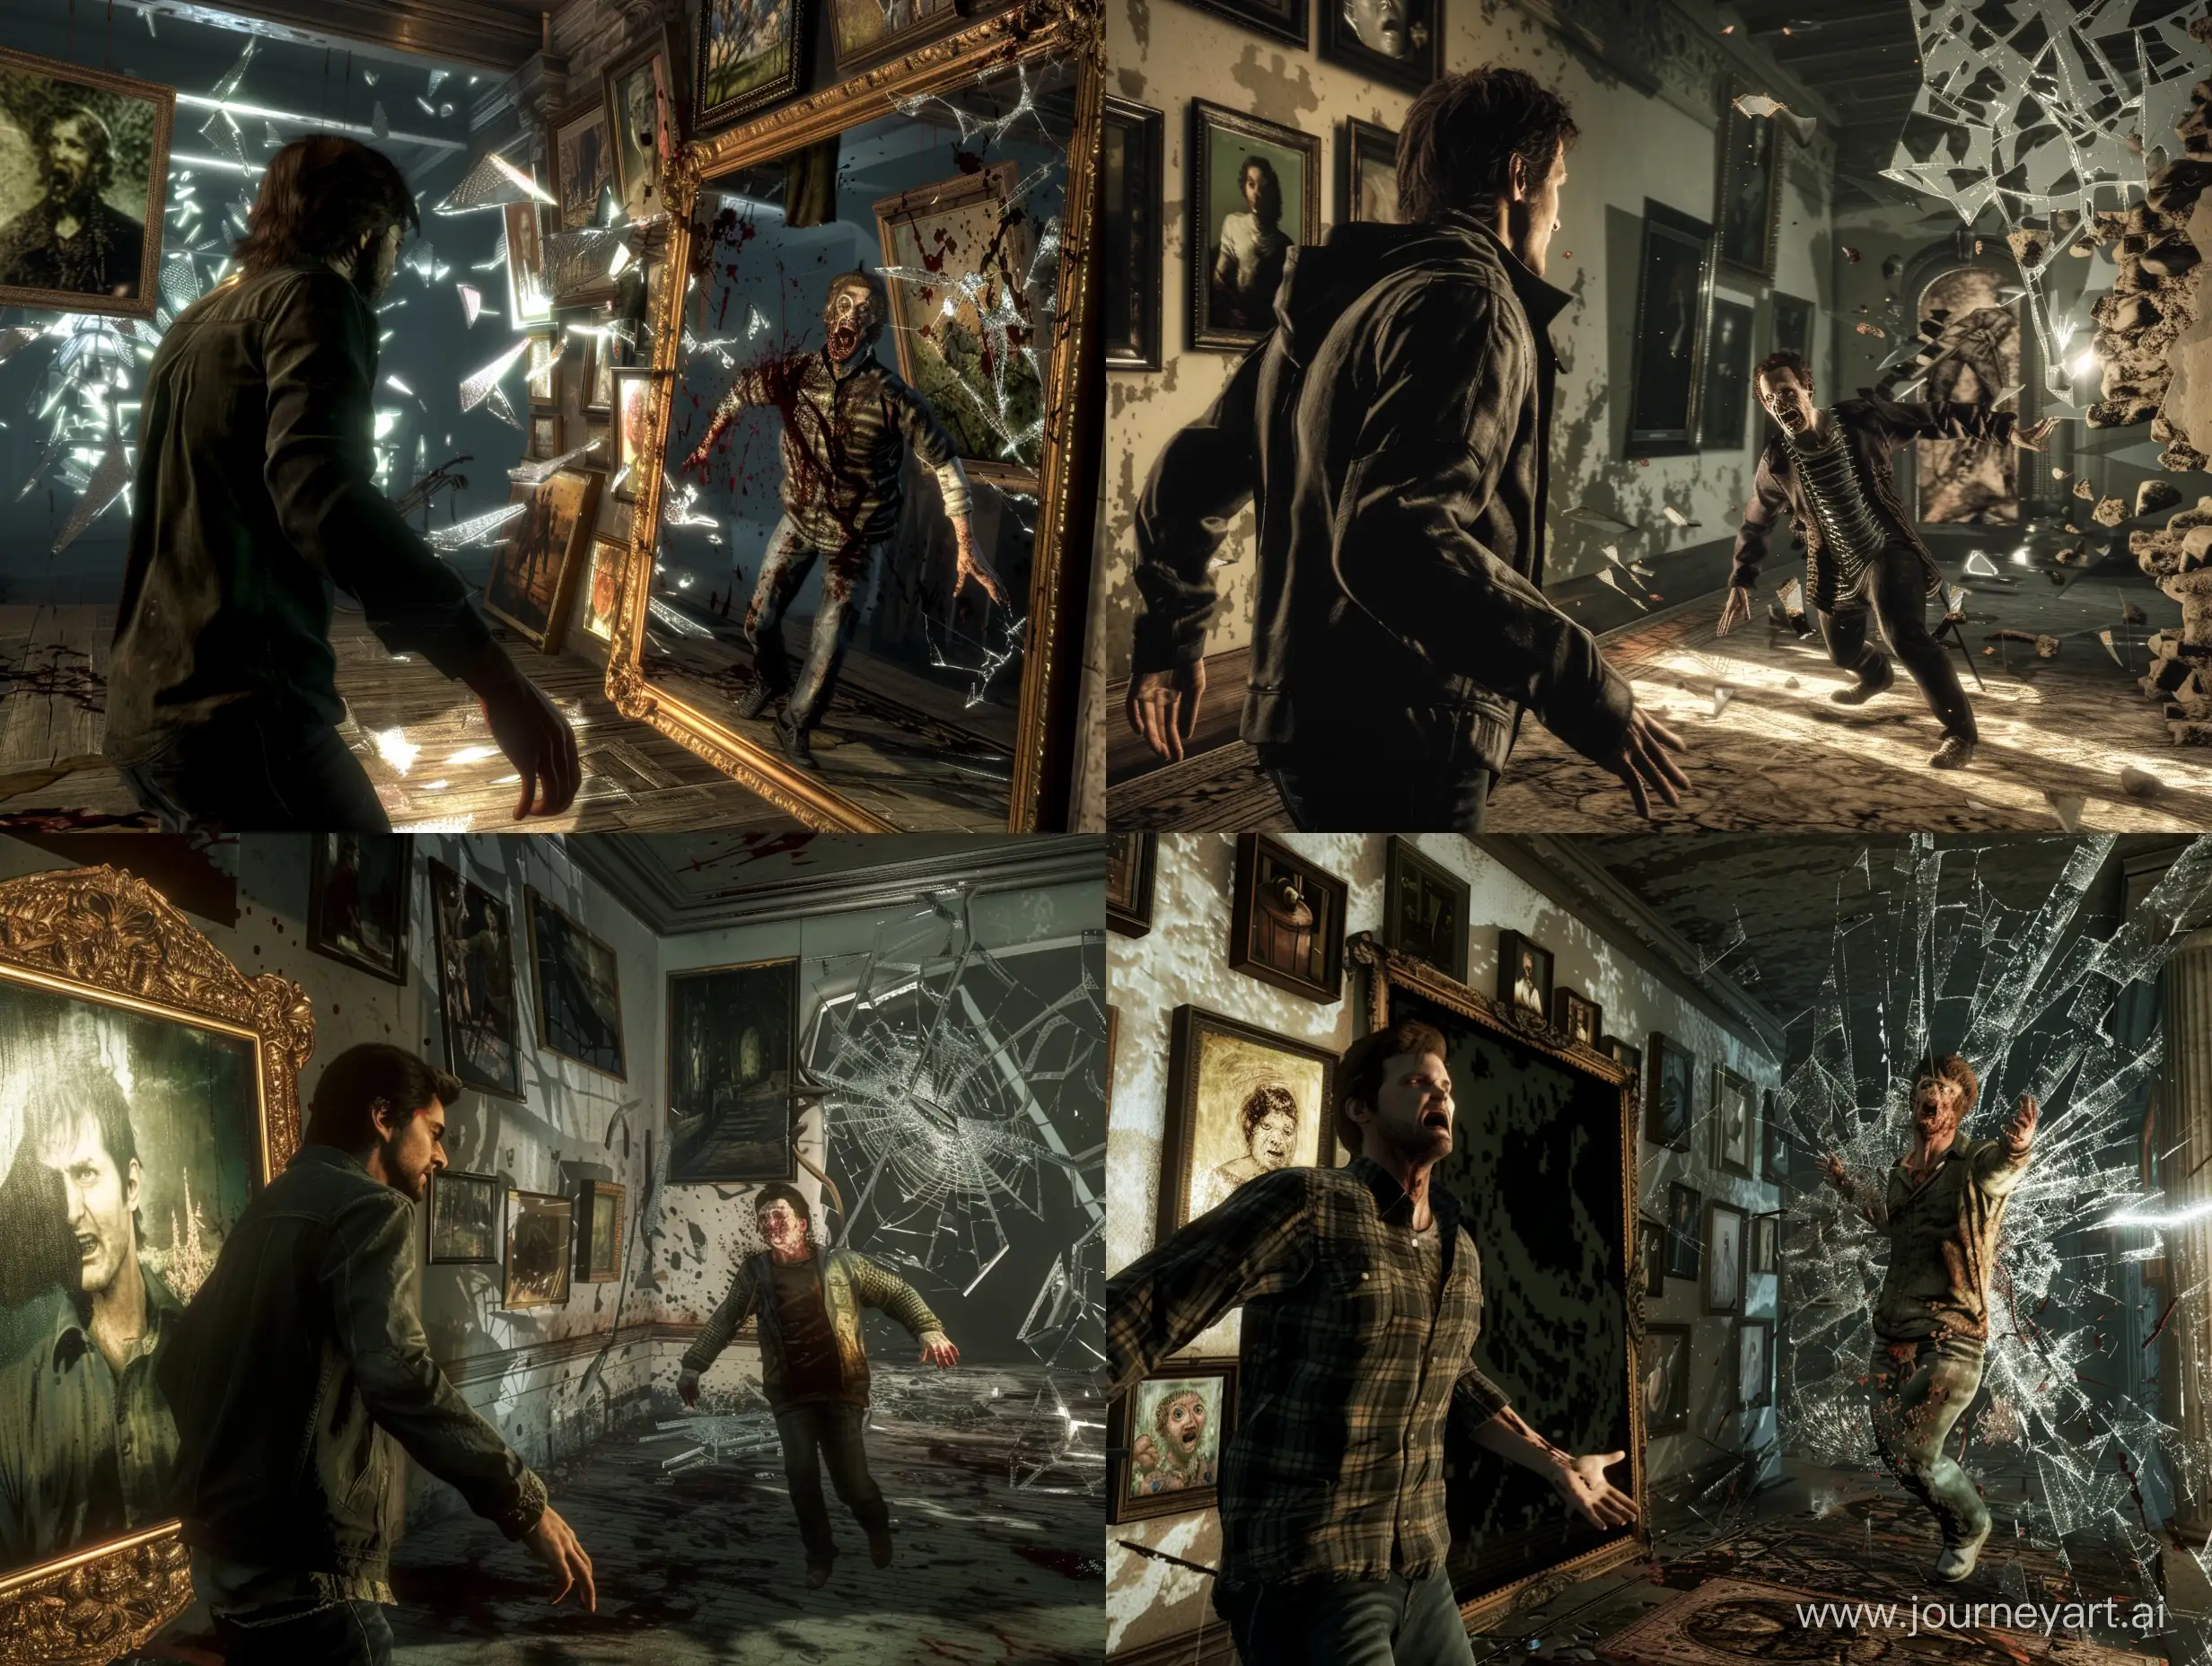 Alan Wake, the protagonist of the game Alan Wake Remastered, as he stands in a dimly lit room. The walls are adorned with paintings of various sizes, some hanging crookedly on the walls, others leaning against them. A large, ornate mirror reflects Alan, his features twisted in fear and disbelief. The source of his terror is a deranged man who has broken free from a straitjacket and is now running towards him, his hands outstretched and his face contorted into a twisted grin. His clothes are tattered and dirty, and his hair is disheveled, giving him a wild and unkempt appearance. The crazy man's eyes are fixed on Alan, his gaze intense and unnerving. In the background, the sound of shattering glass echoes through the room, adding to the chaotic and eerie atmosphere. The air is thick with a sense of foreboding and danger, as Alan desperately tries to escape from the clutches of this deranged individual.